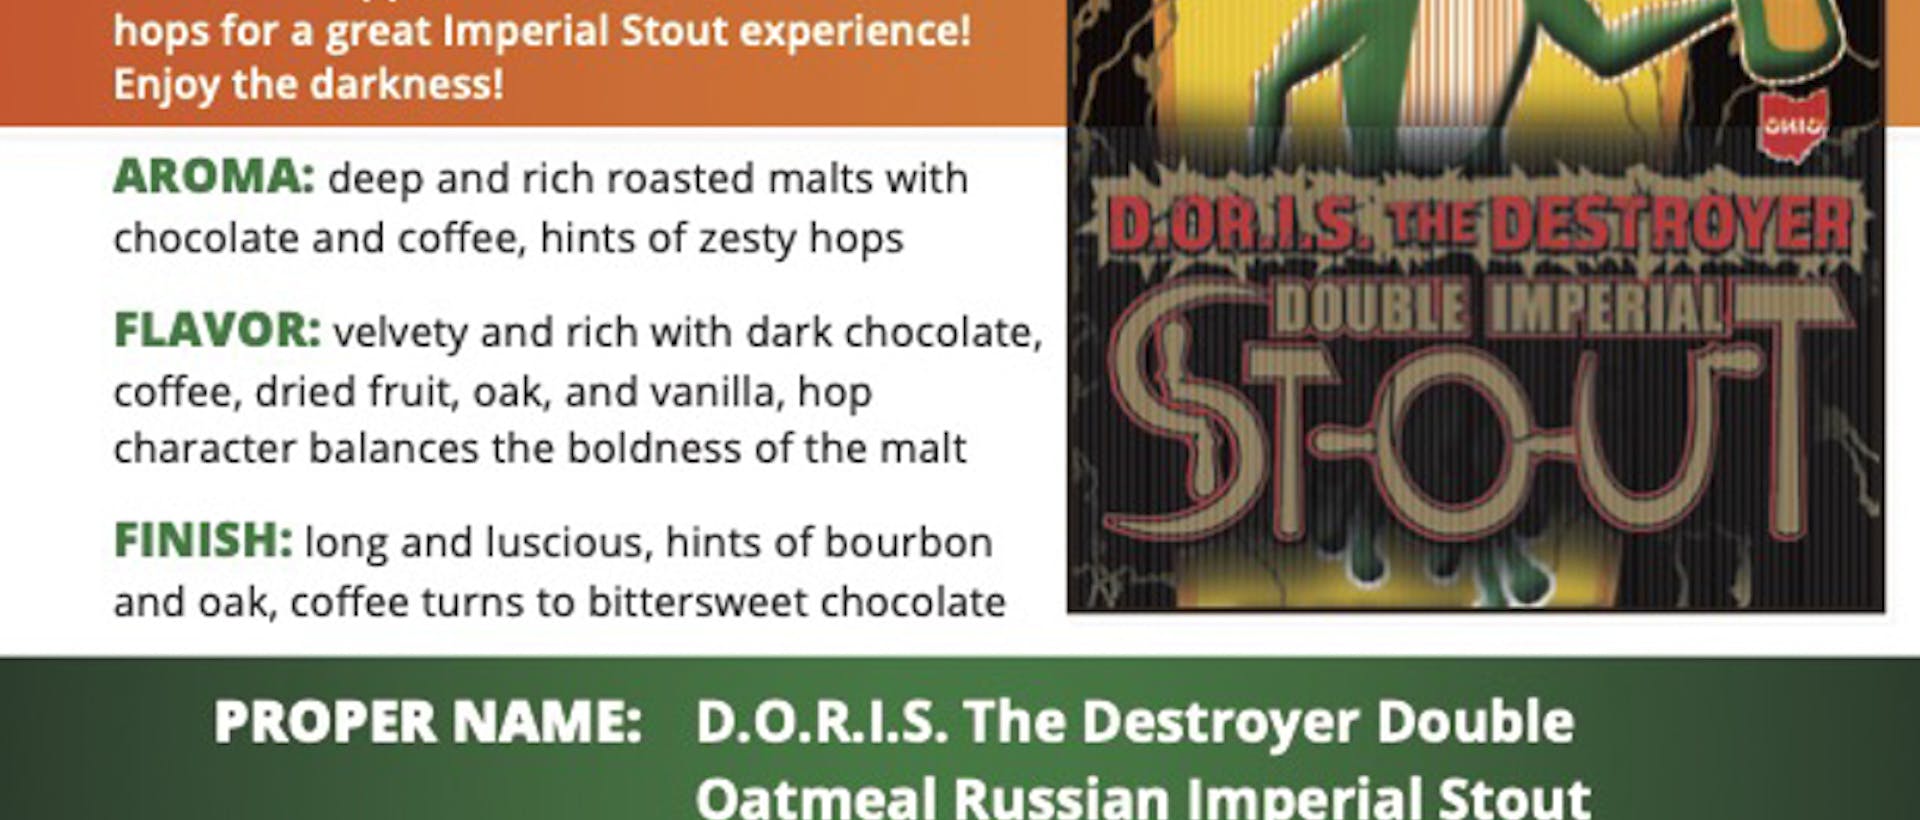 HF_Sell Sheet - Limited - D.O.R.I.S. The Destroyer Double Oatmeal Imperial Stout (updated 03-26-2022)